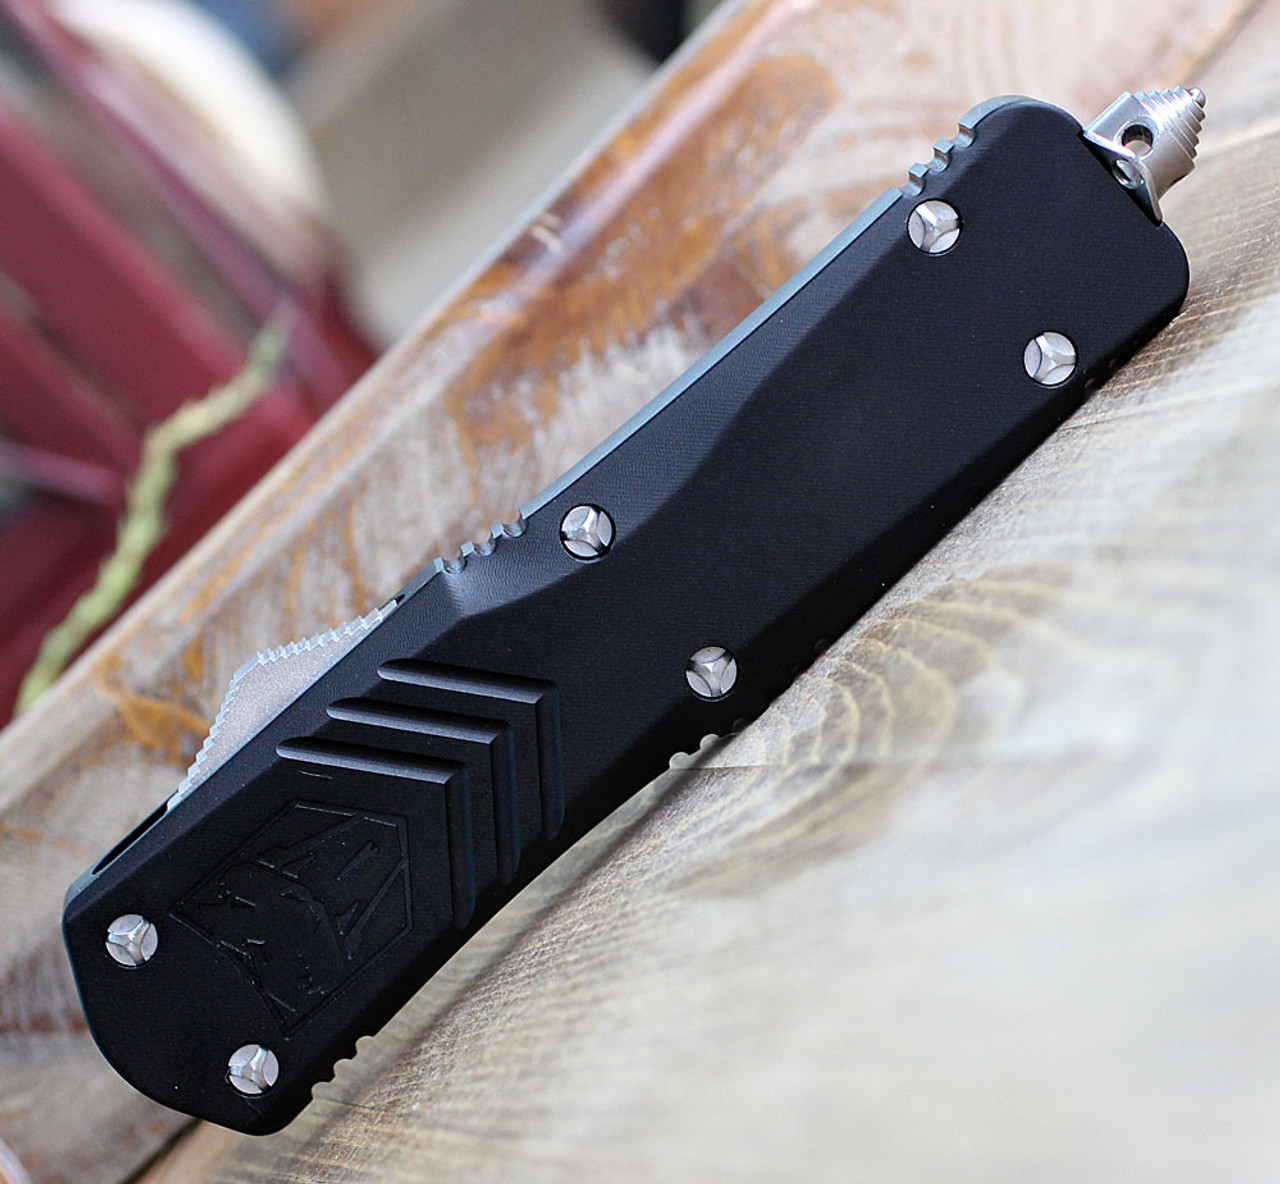 CobraTec Knives LBLKFS-XLWNS Large FS-X Black, 3.50" D2 Steel Wharncliffe Blade, Anodized Aviation Aluminum Handle